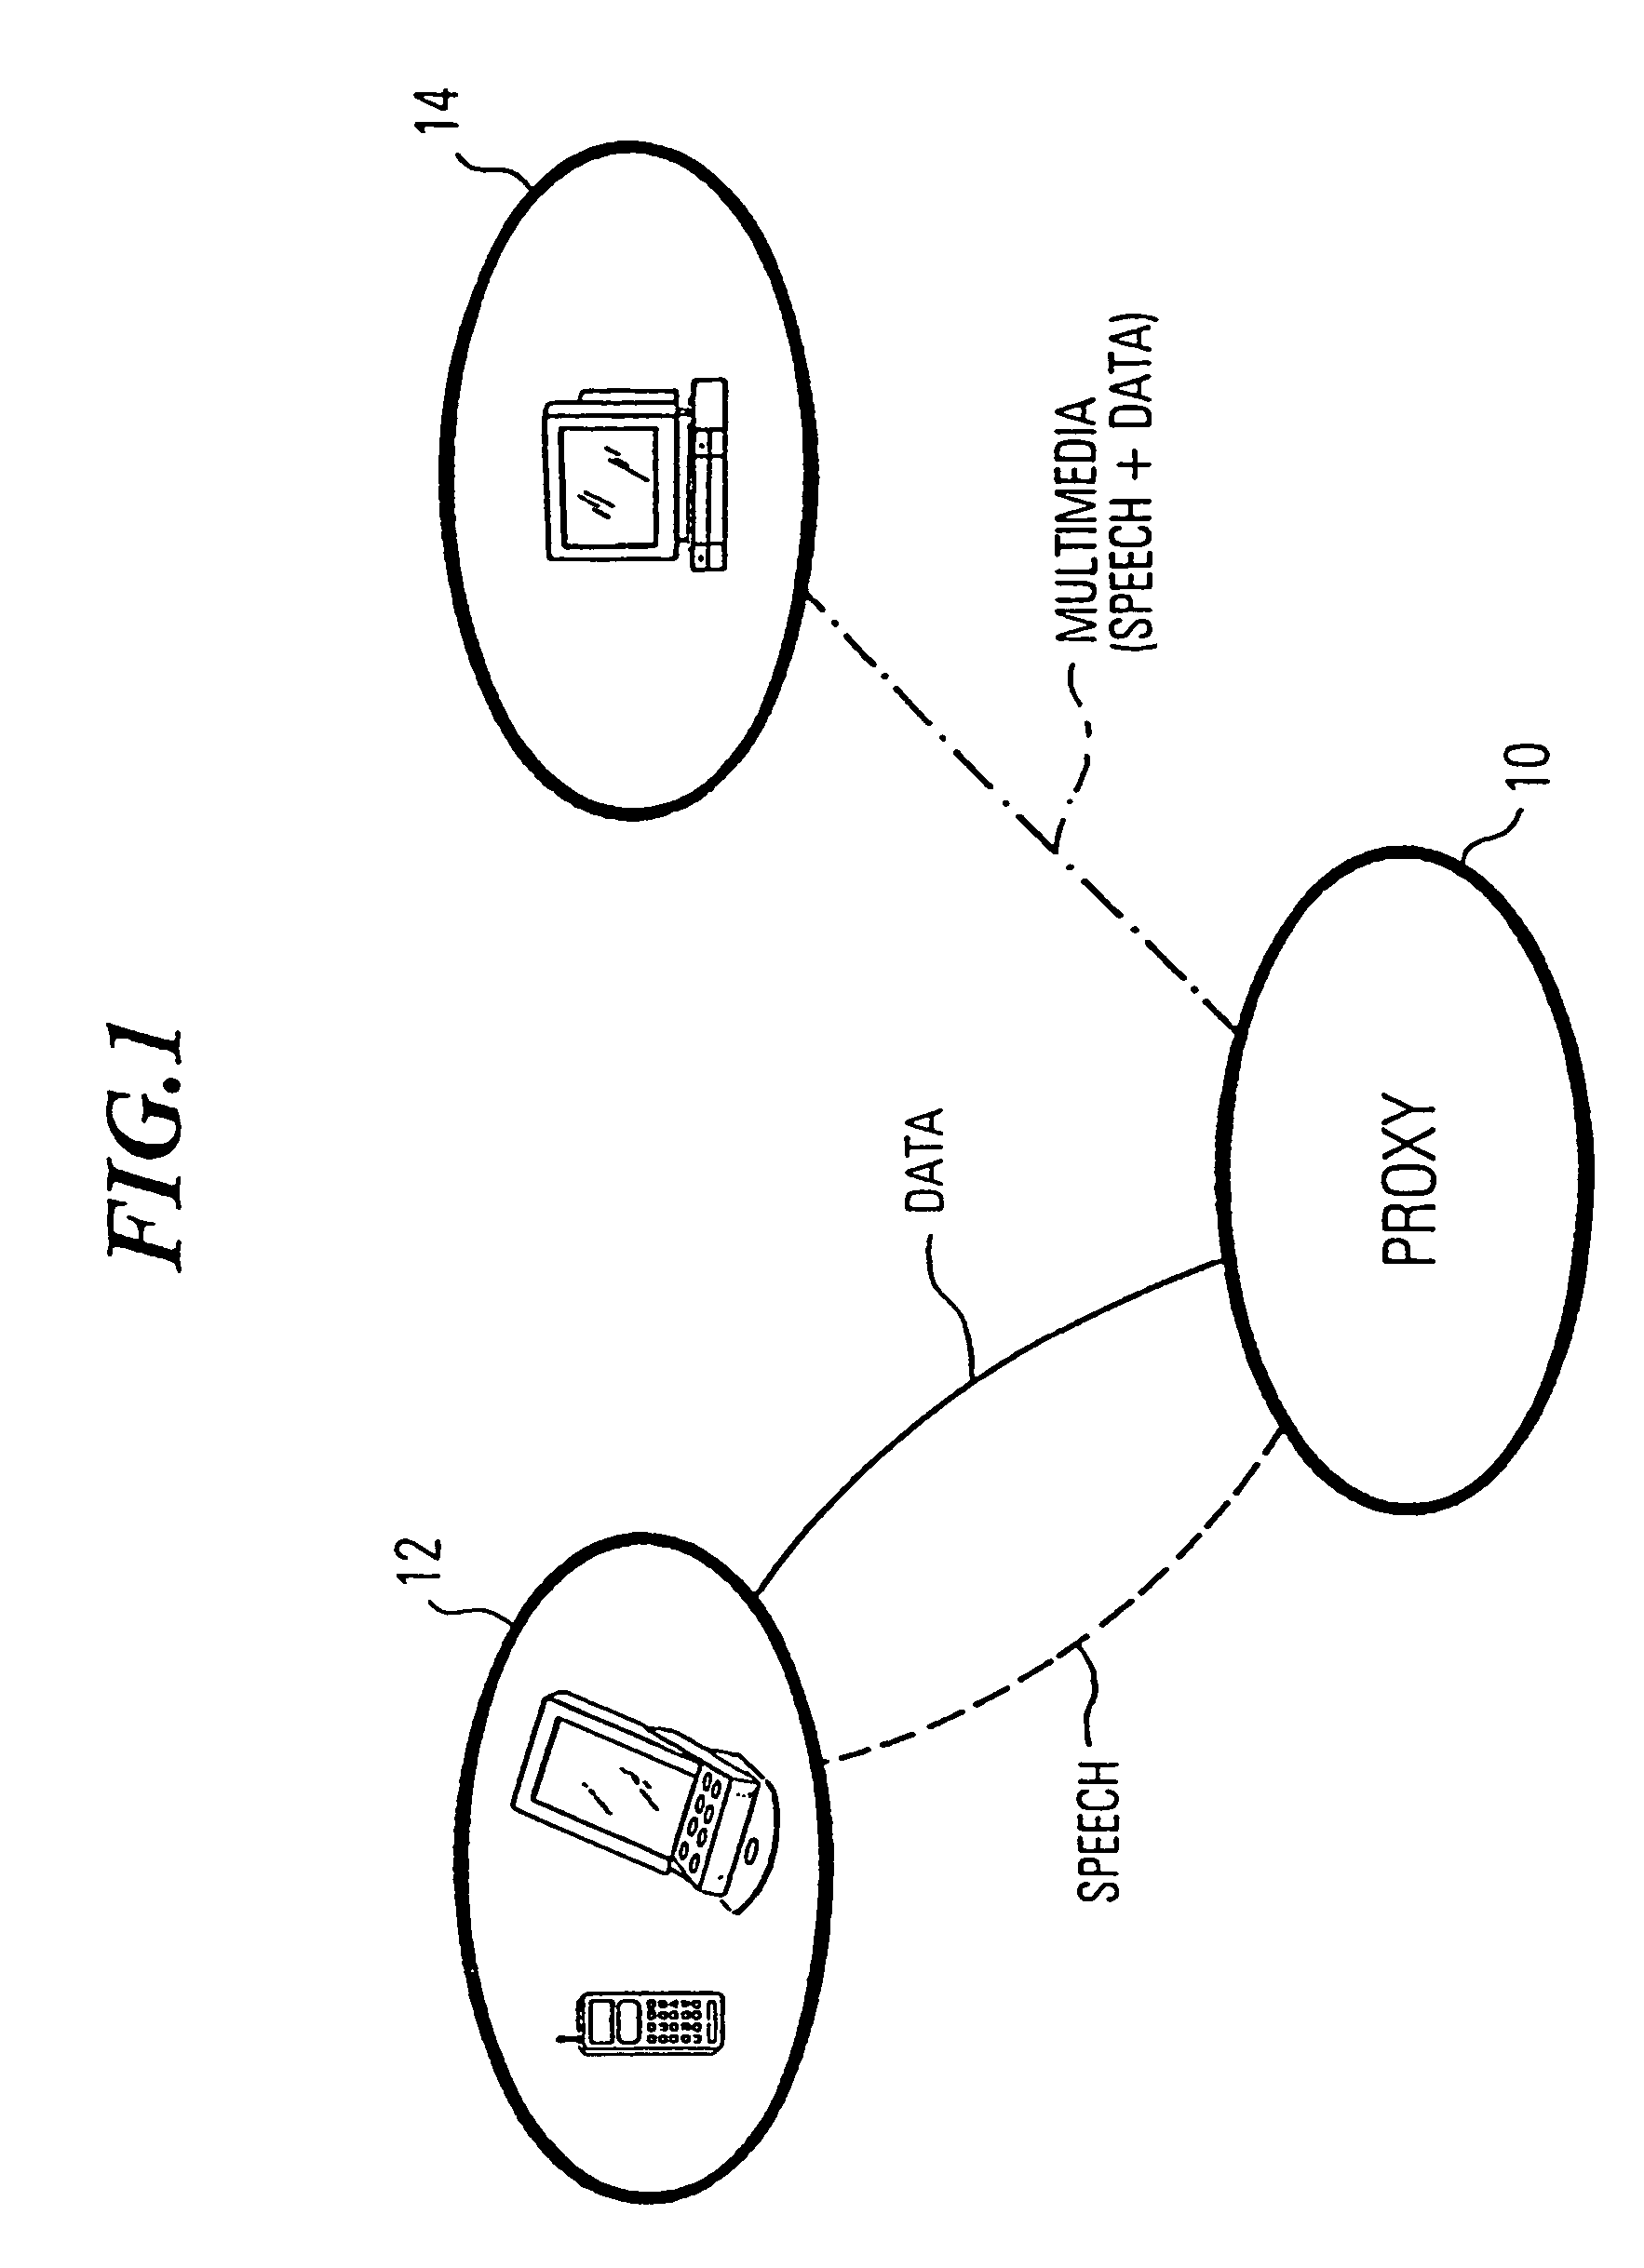 Proxy apparatus and method